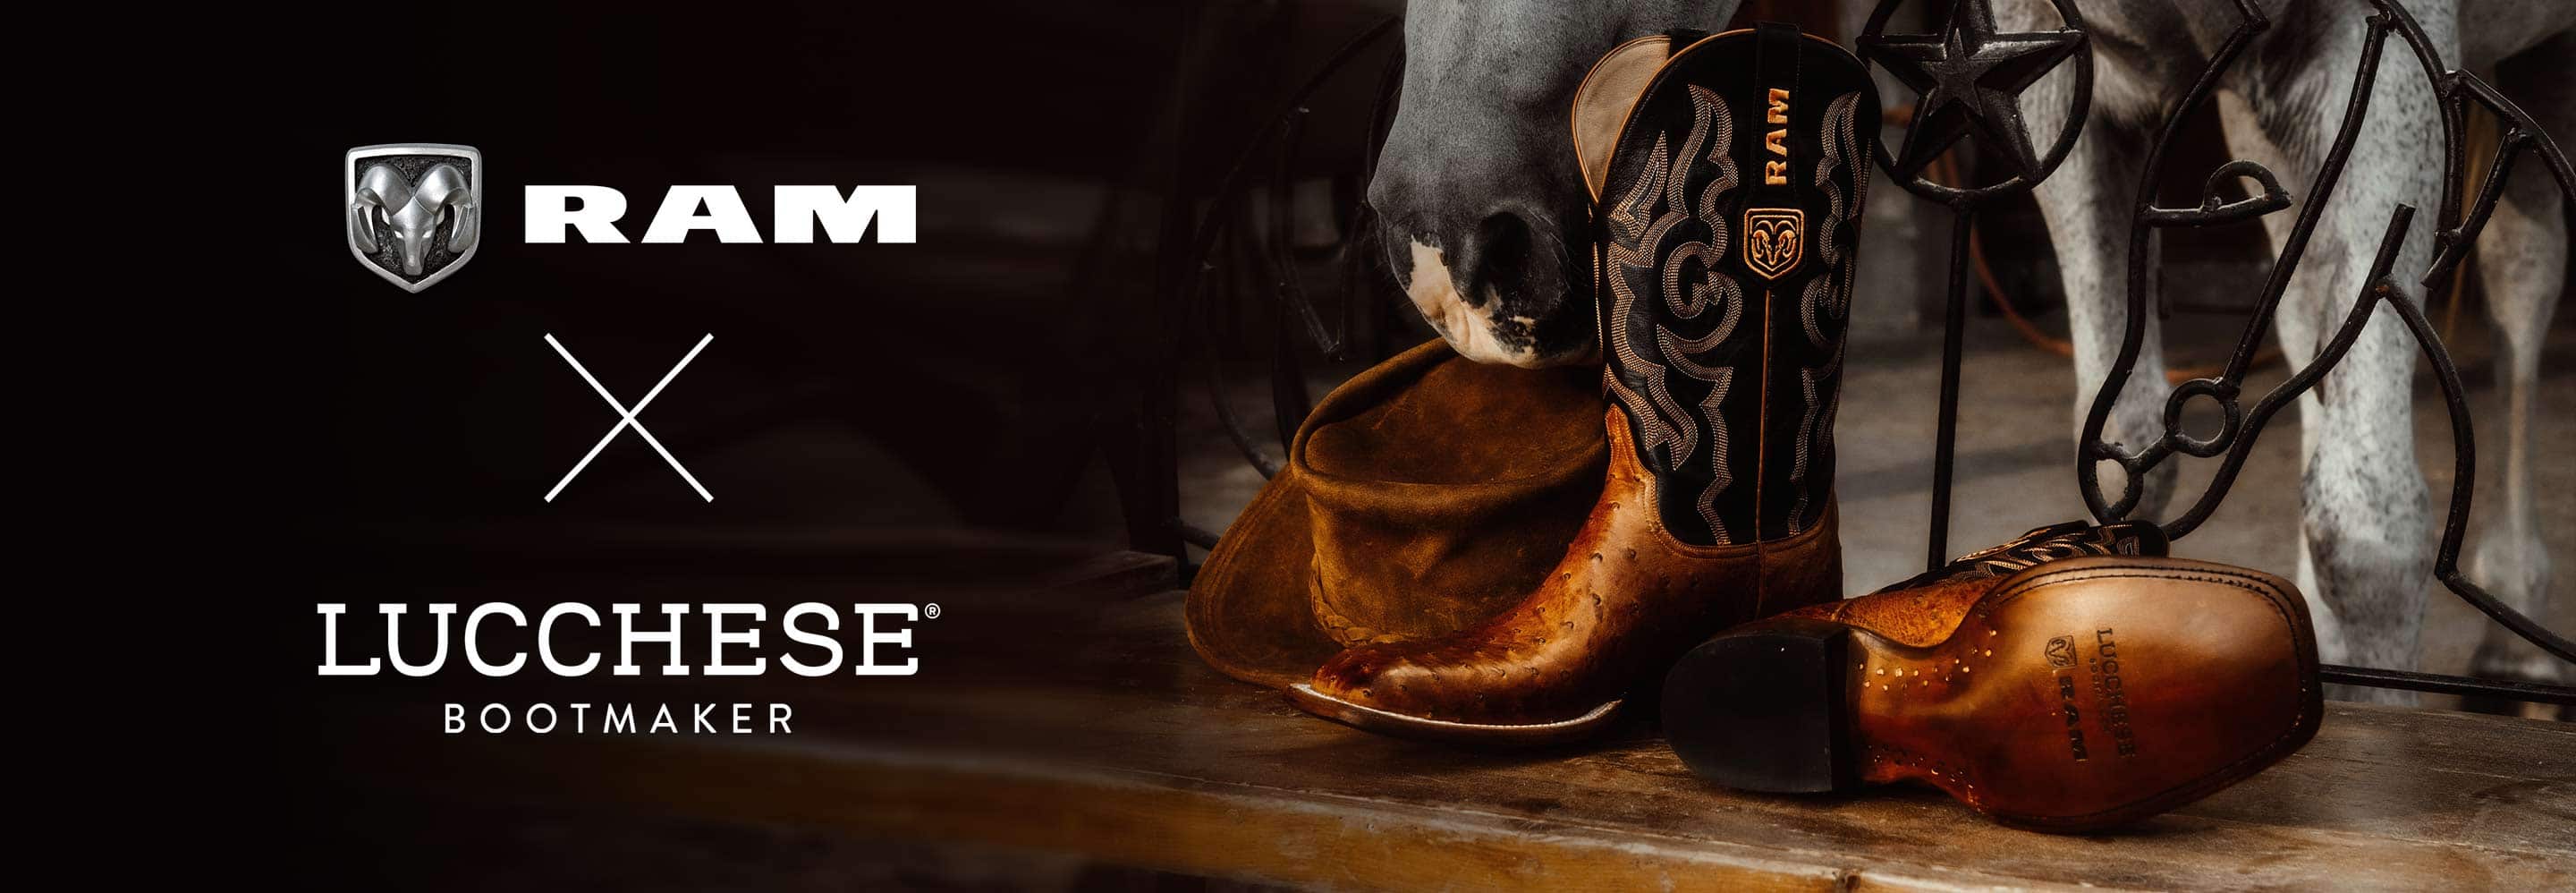 Ram's Head logo and Ram brand mark. Lucchese bootmaker logo. A pair of leather cowboy boots with Ram branding on the pulls and Ram and Lucchese branding on the soles.